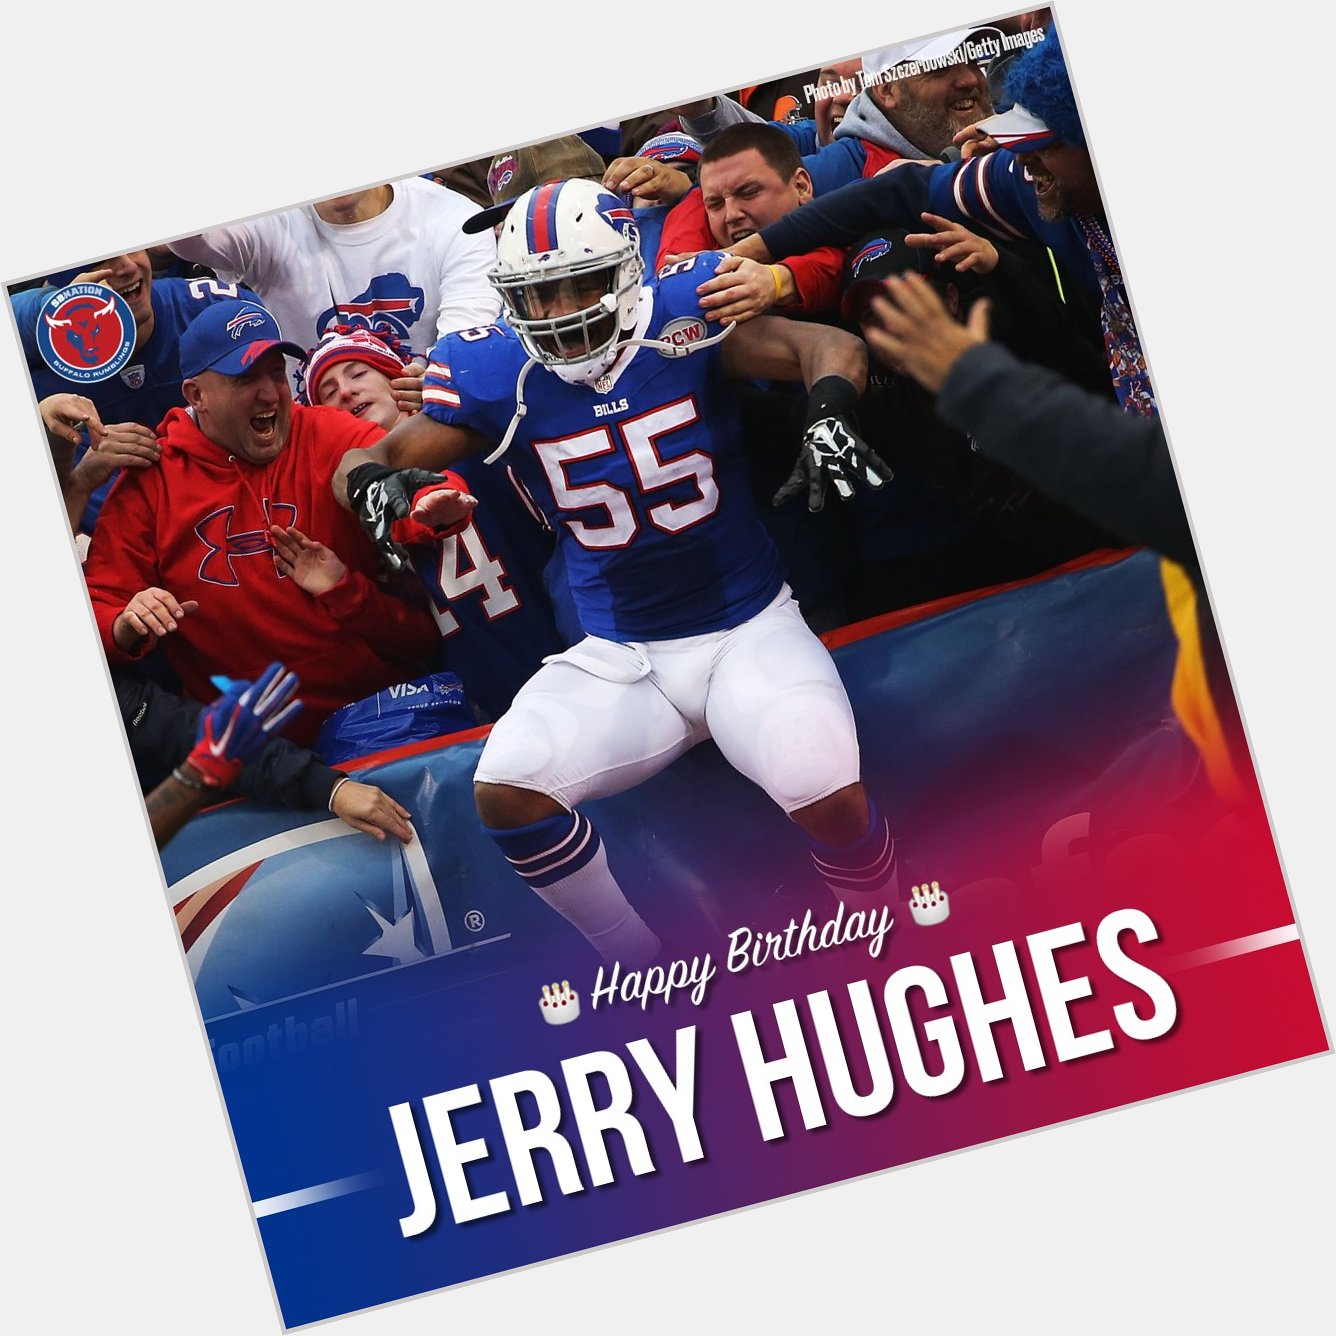 Happy birthday, Jerry Hughes! Hope you\re celebrating with a lot of friends, just like you were able to here. 